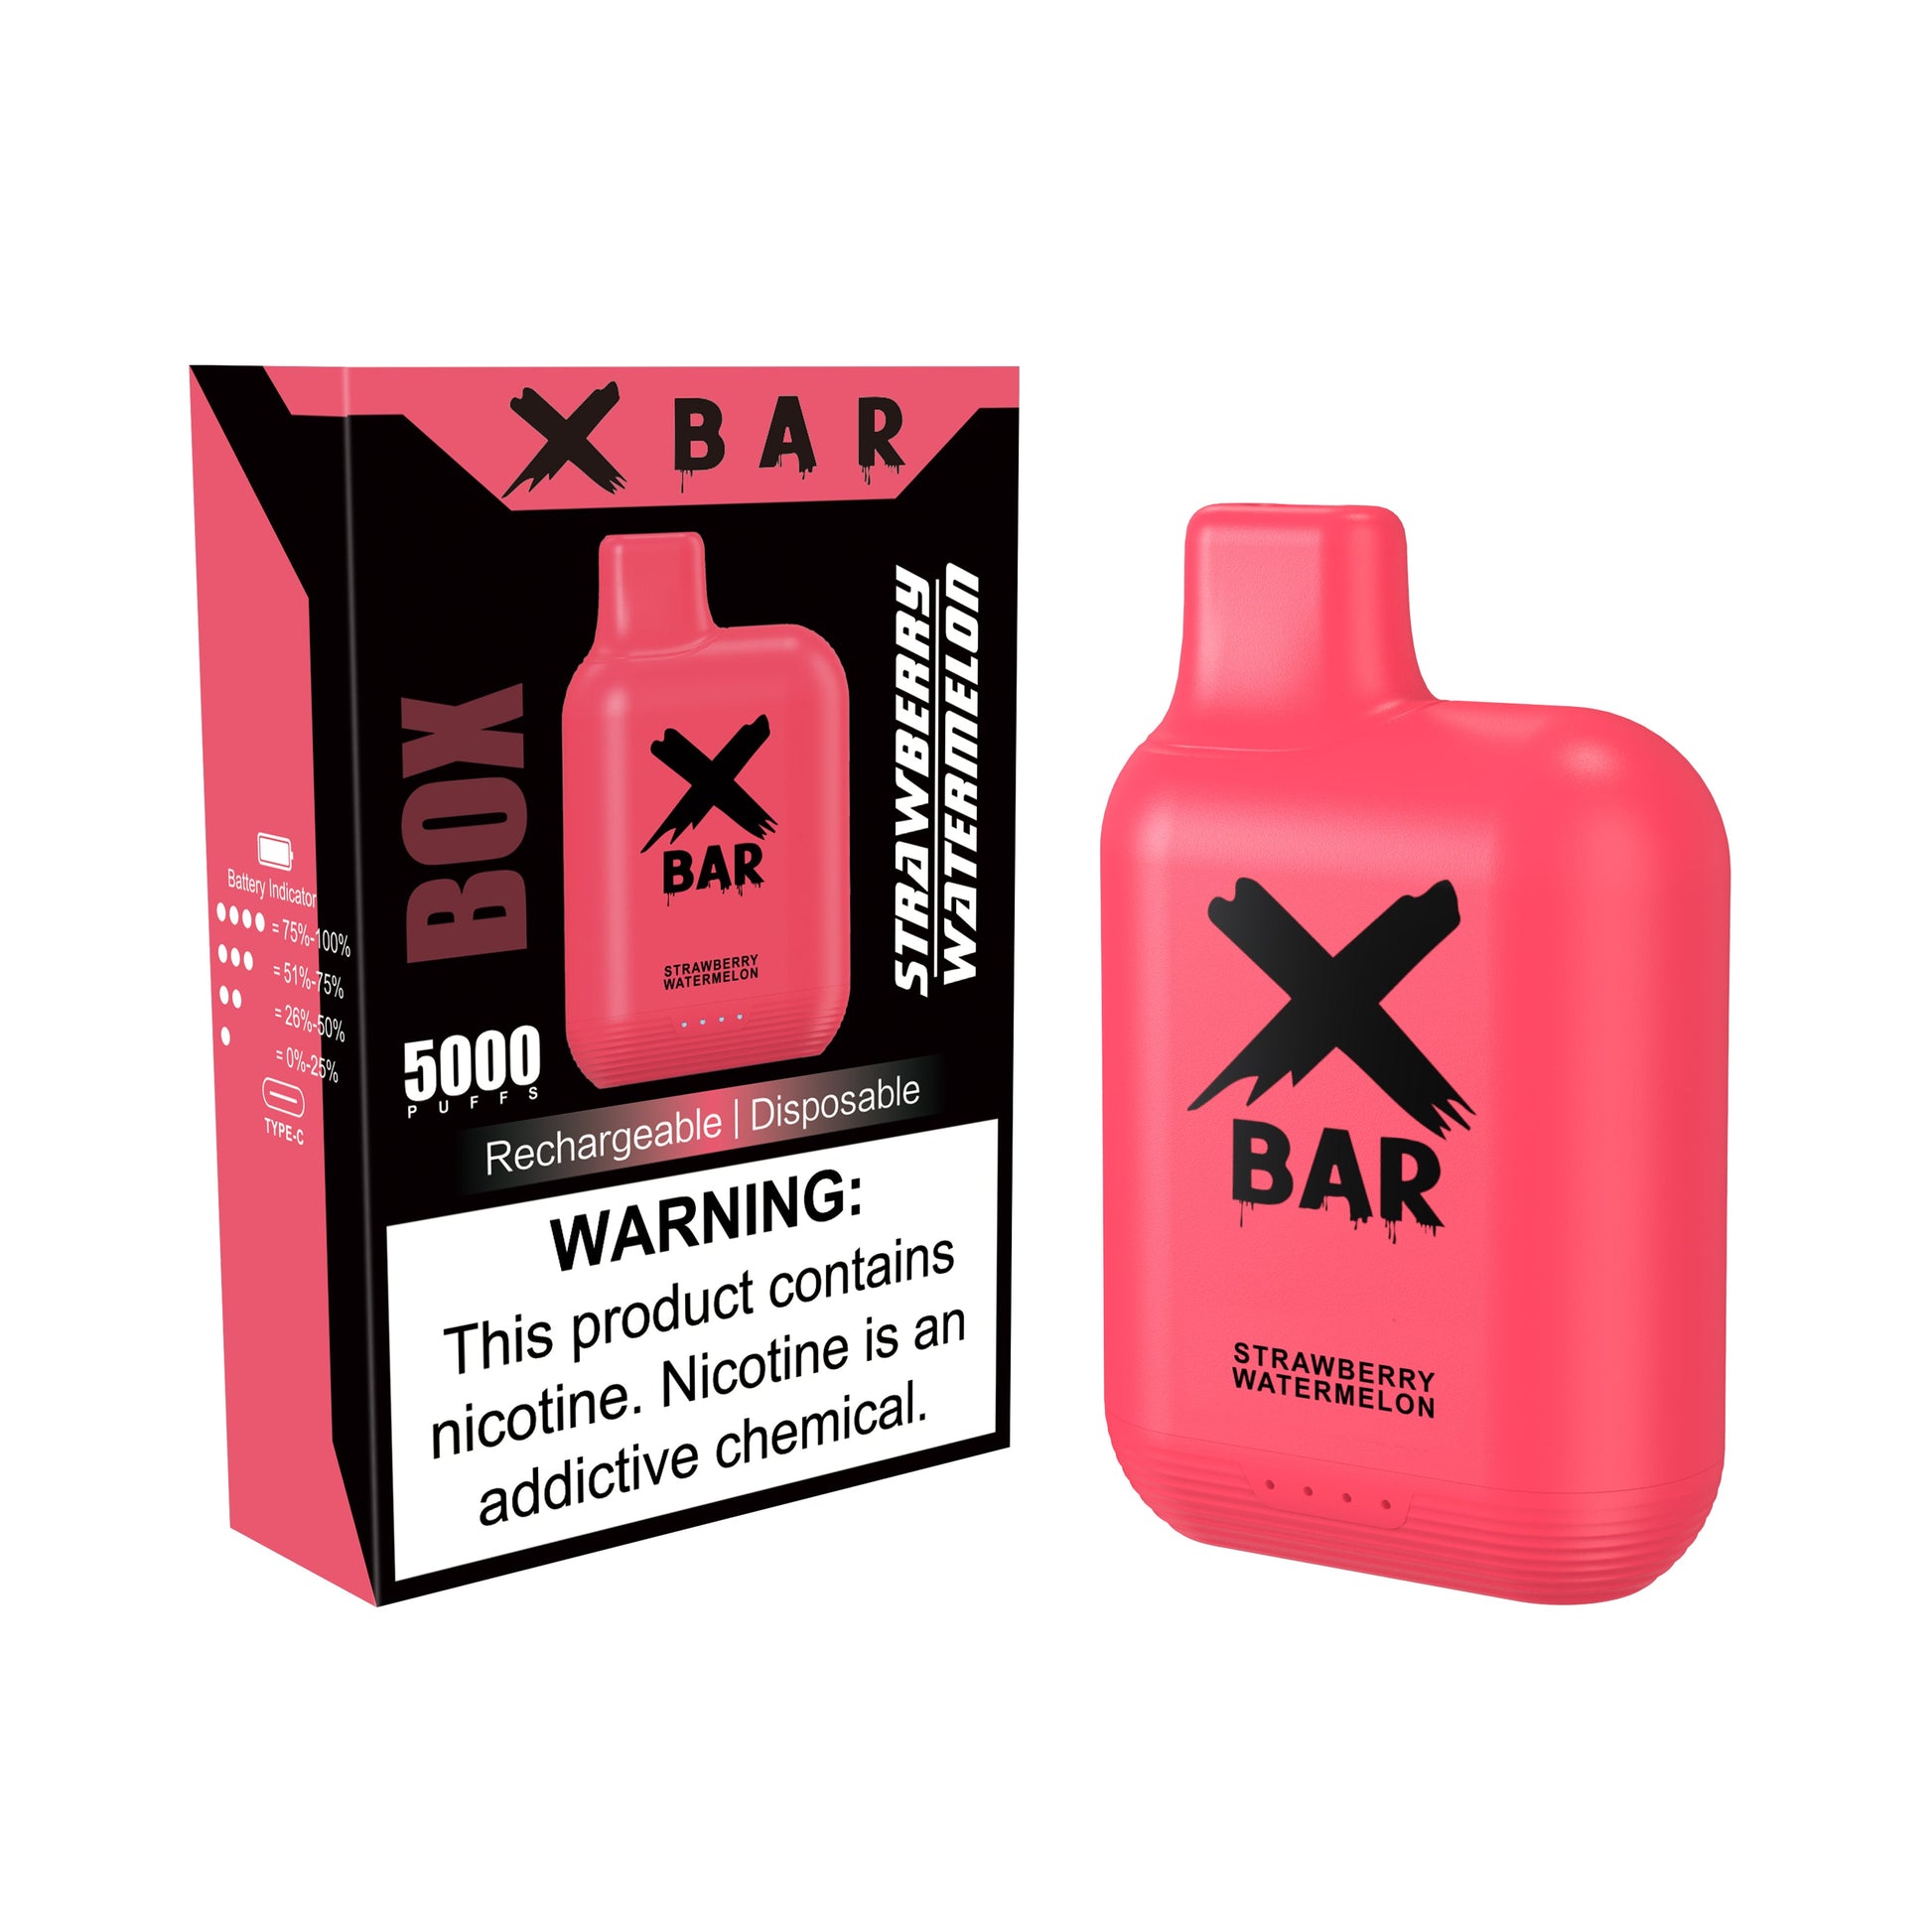 Strawberry Watermelon Flavored  with Xbar Disposable 